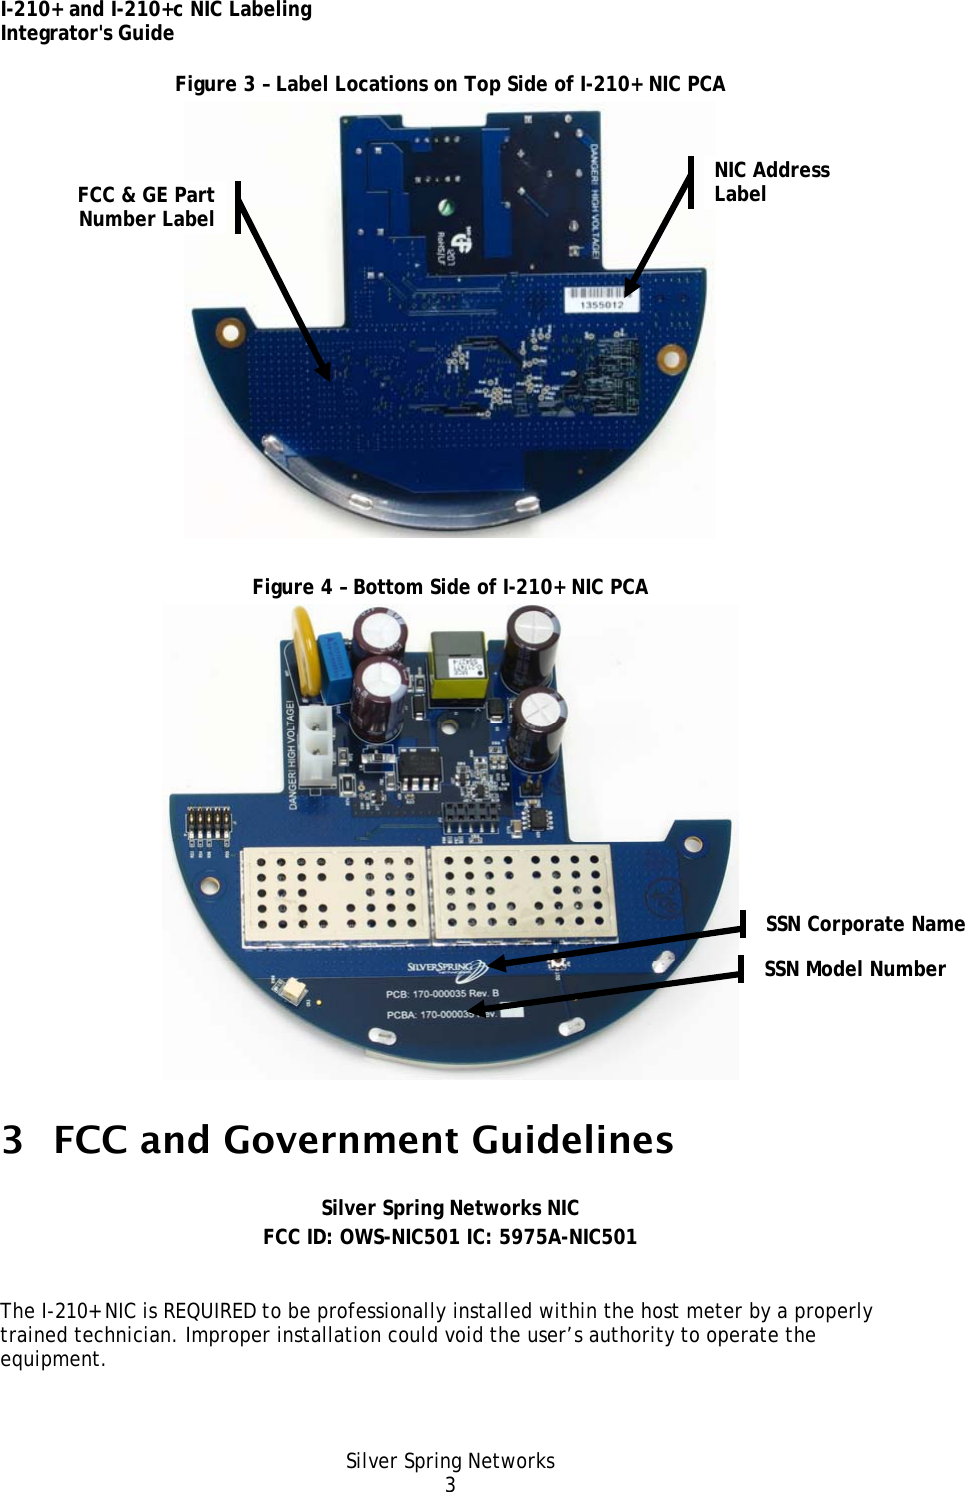 I-210+ and I-210+c NIC Labeling Integrator&apos;s Guide Silver Spring Networks 3 Figure 3 – Label Locations on Top Side of I-210+ NIC PCA  Figure 4 – Bottom Side of I-210+ NIC PCA  3 FCC and Government Guidelines  Silver Spring Networks NIC FCC ID: OWS-NIC501 IC: 5975A-NIC501  The I-210+ NIC is REQUIRED to be professionally installed within the host meter by a properly trained technician. Improper installation could void the user’s authority to operate the equipment. NIC Address Label FCC &amp; GE Part Number Label SSN Corporate Name SSN Model Number 